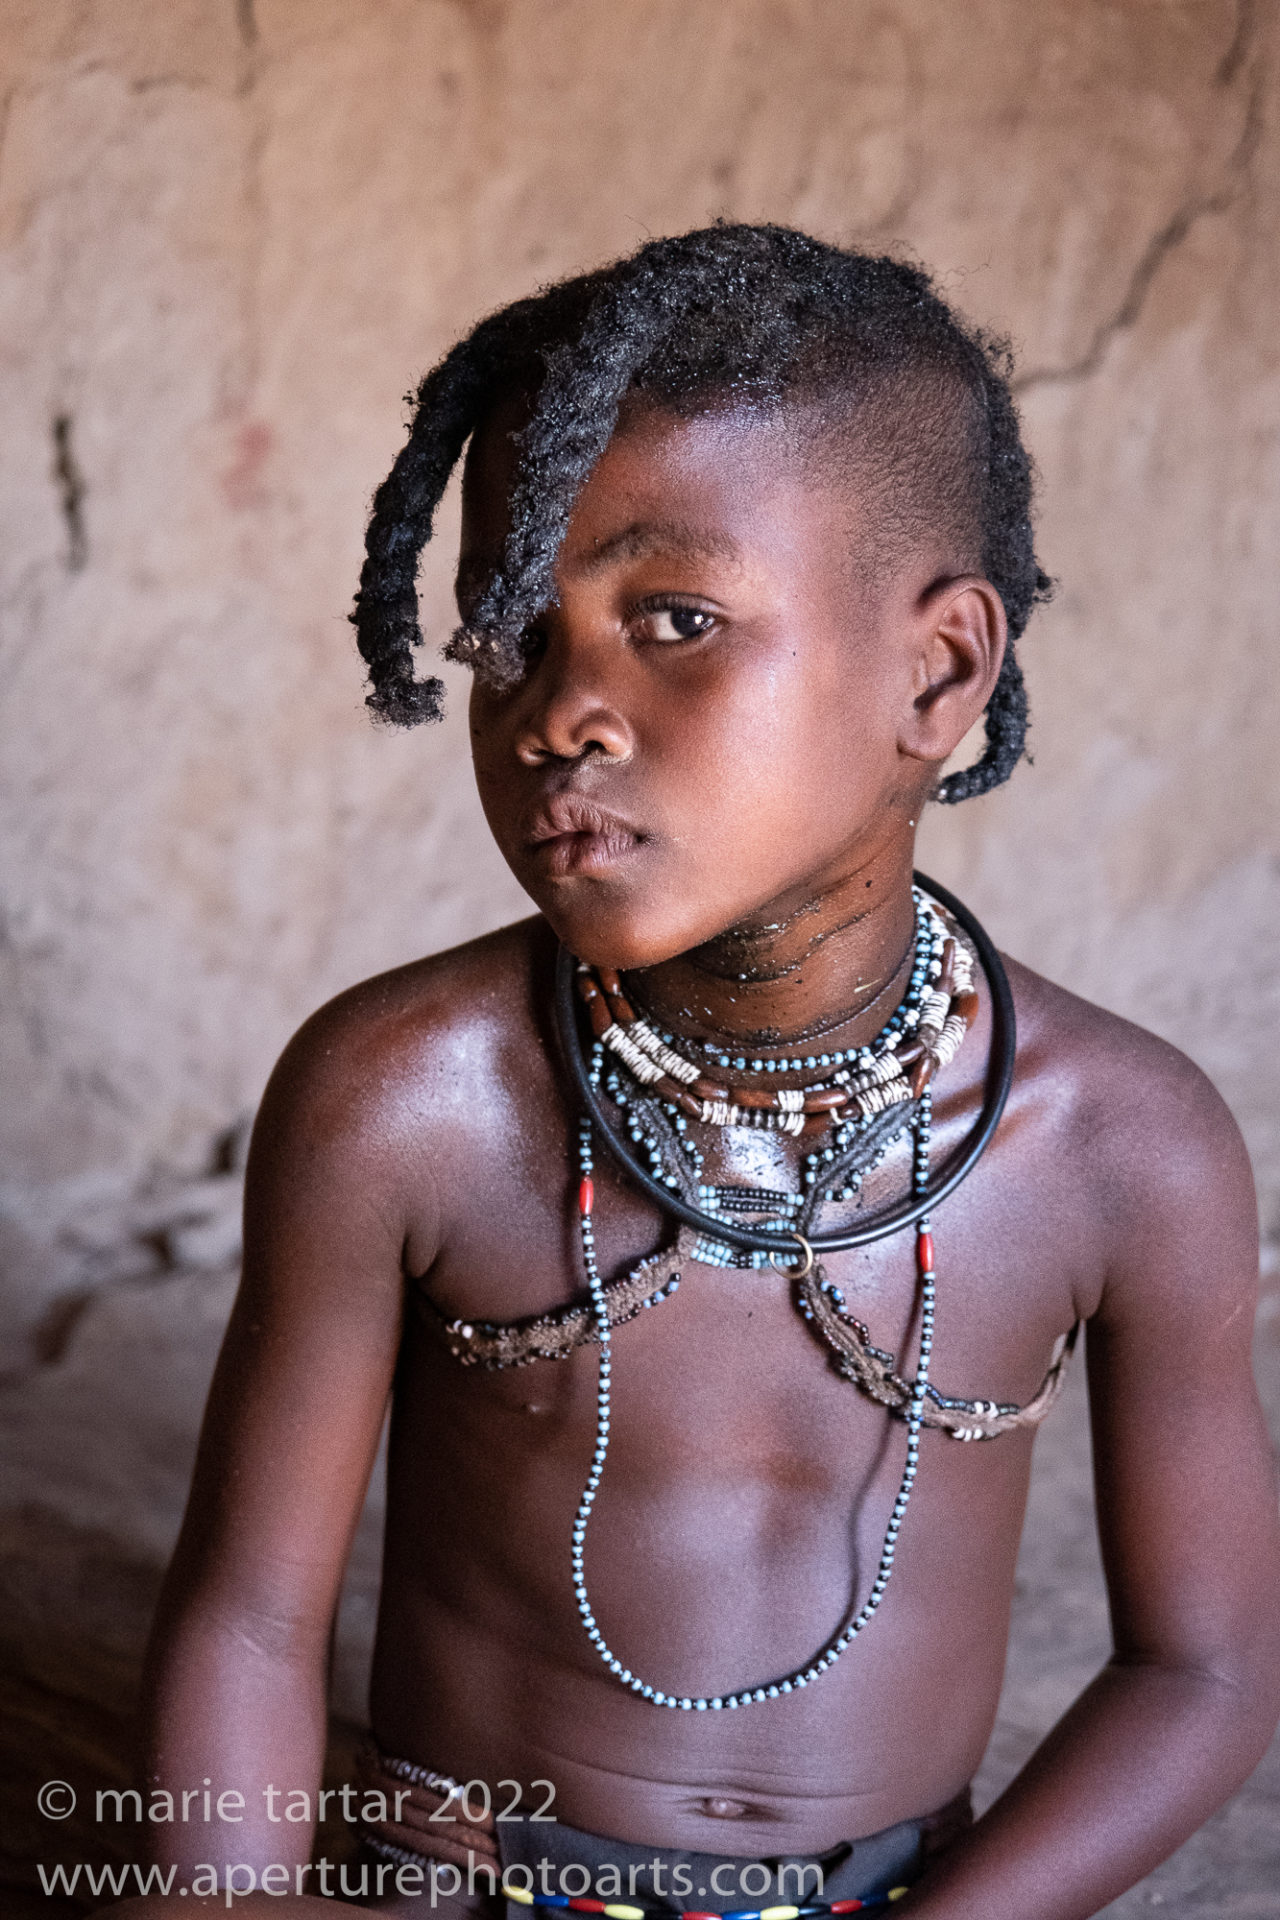 young Himba girl in Namibia